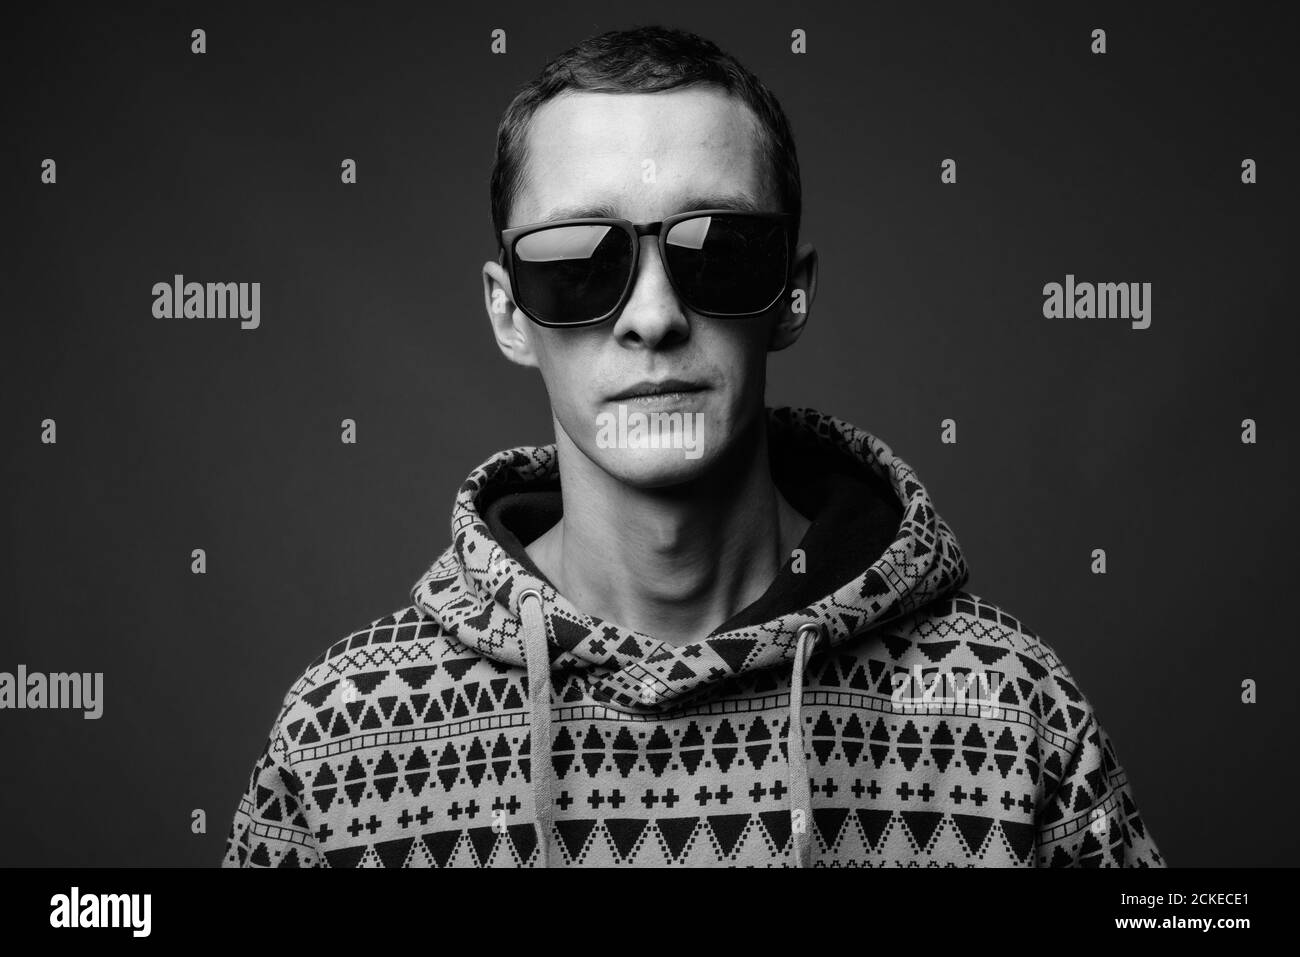 Portrait of young man wearing hoodie against gray background Stock Photo